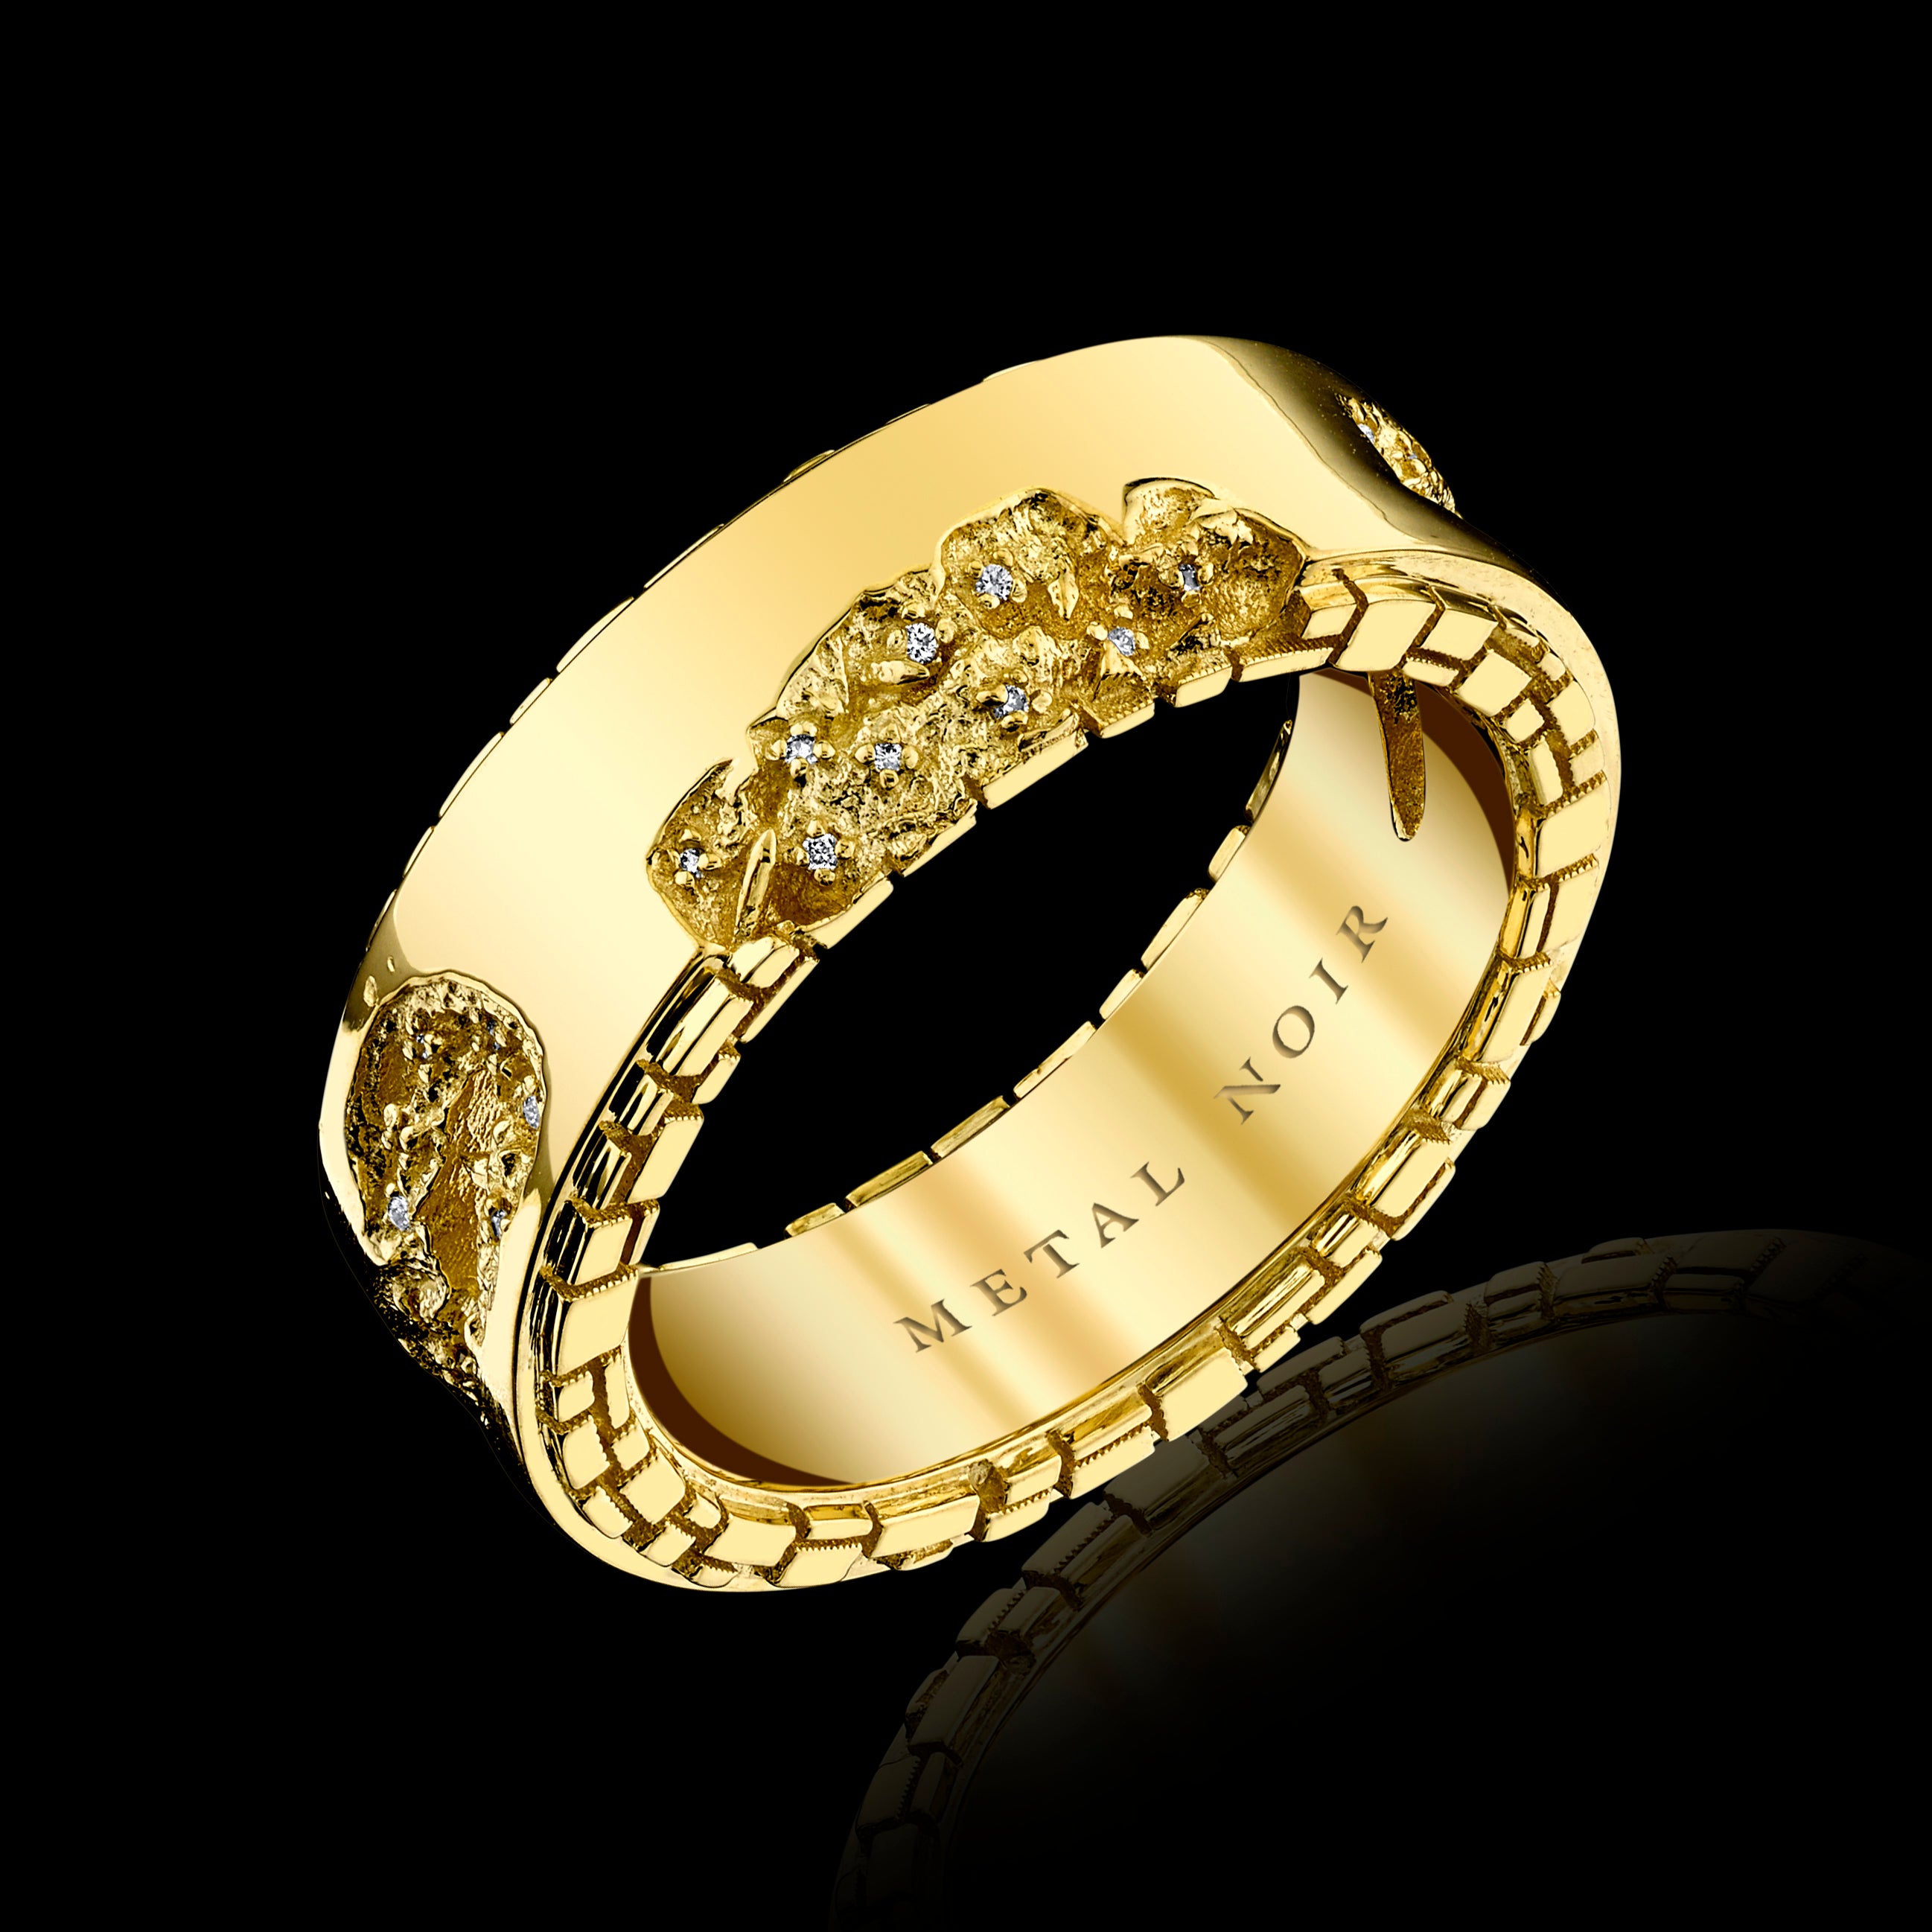 ‘Eroded Architecture’ XL Ring in solid 18k yellow gold • Edition of 50